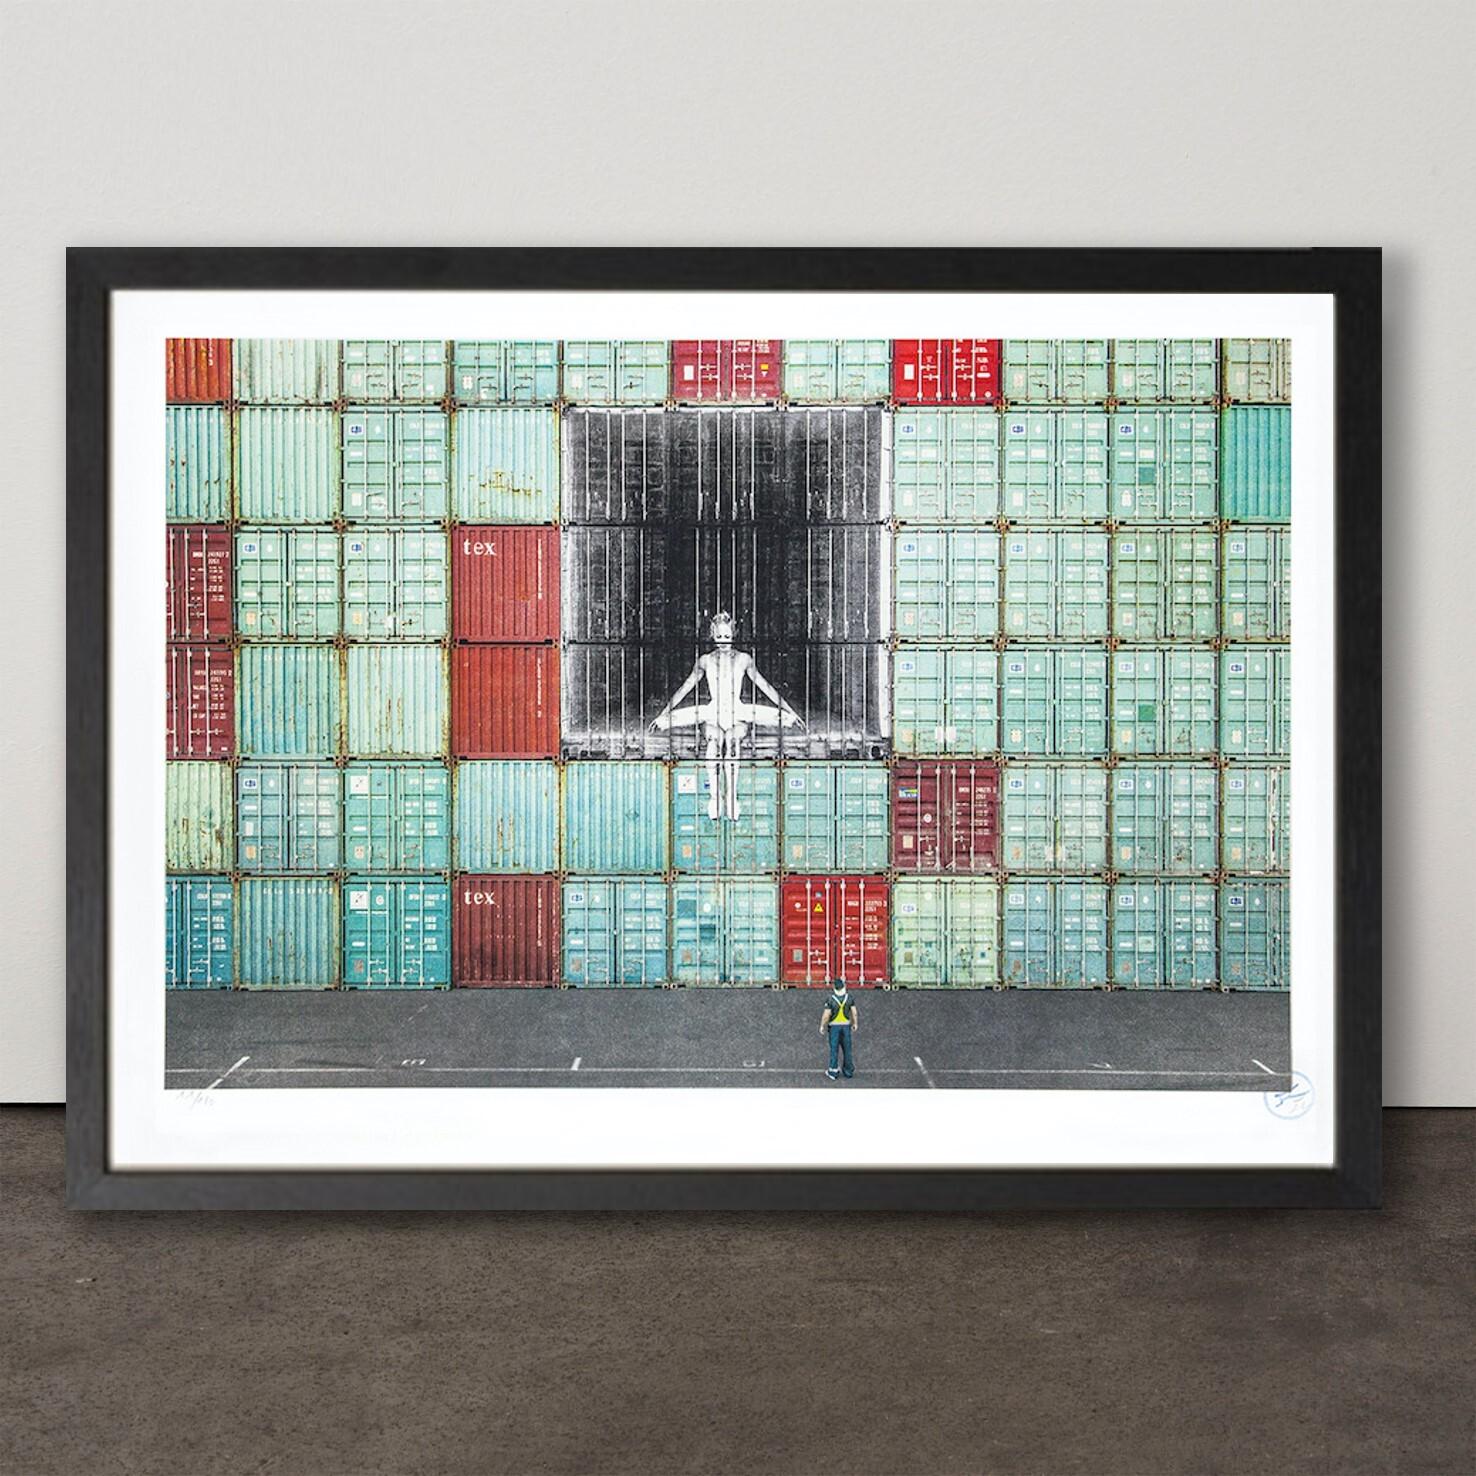 In the Container Wall, Le Havre, France - Contemporary, 21st Century, Lithograph - Print by JR artist